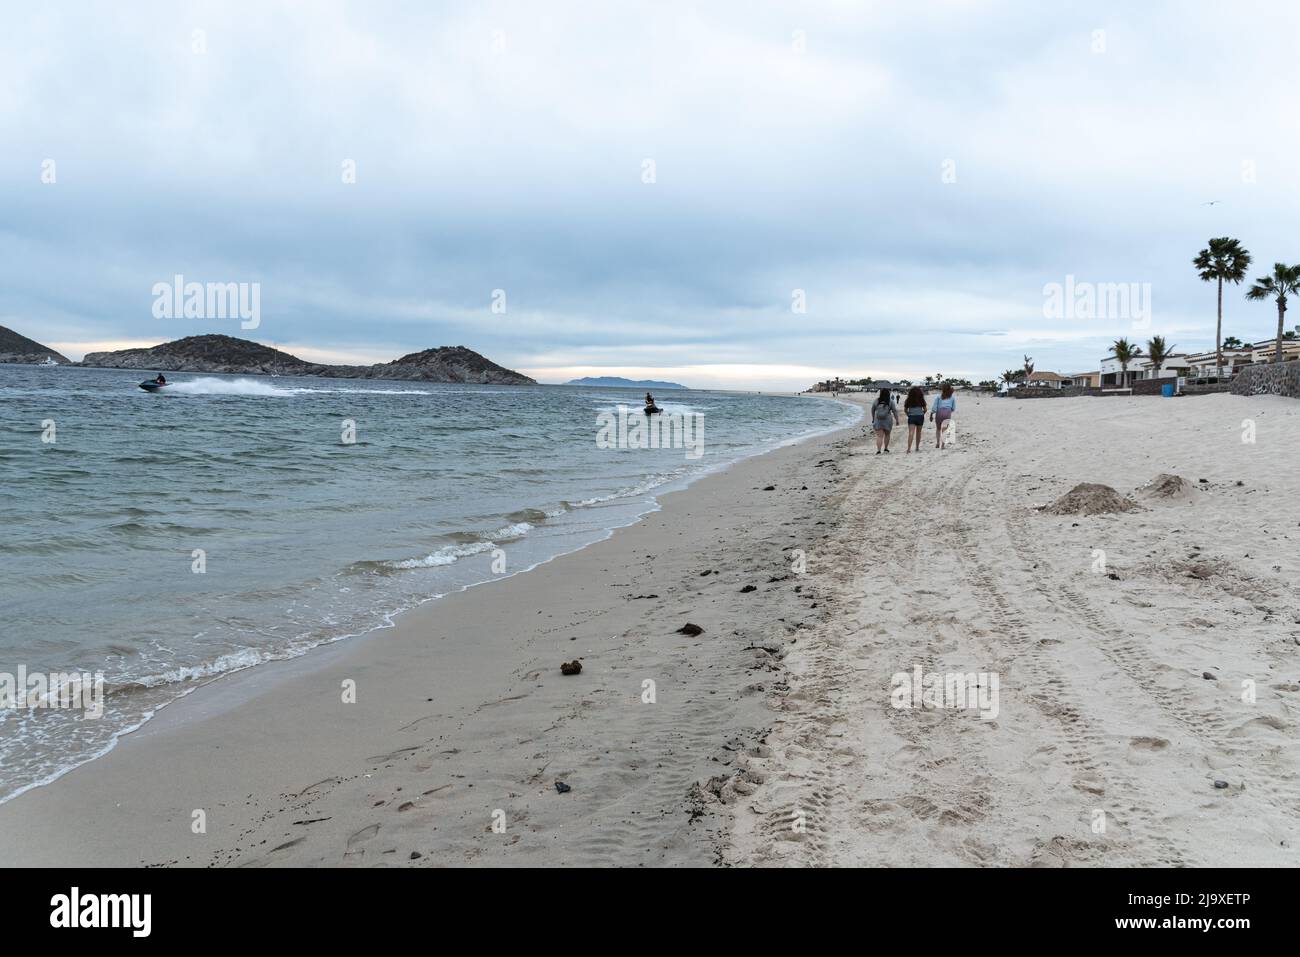 Three young women walk on Algodones beach while two jet skis speed across rough seas under cloudy skies in San Carlos, Sonora, Mexico. Stock Photo